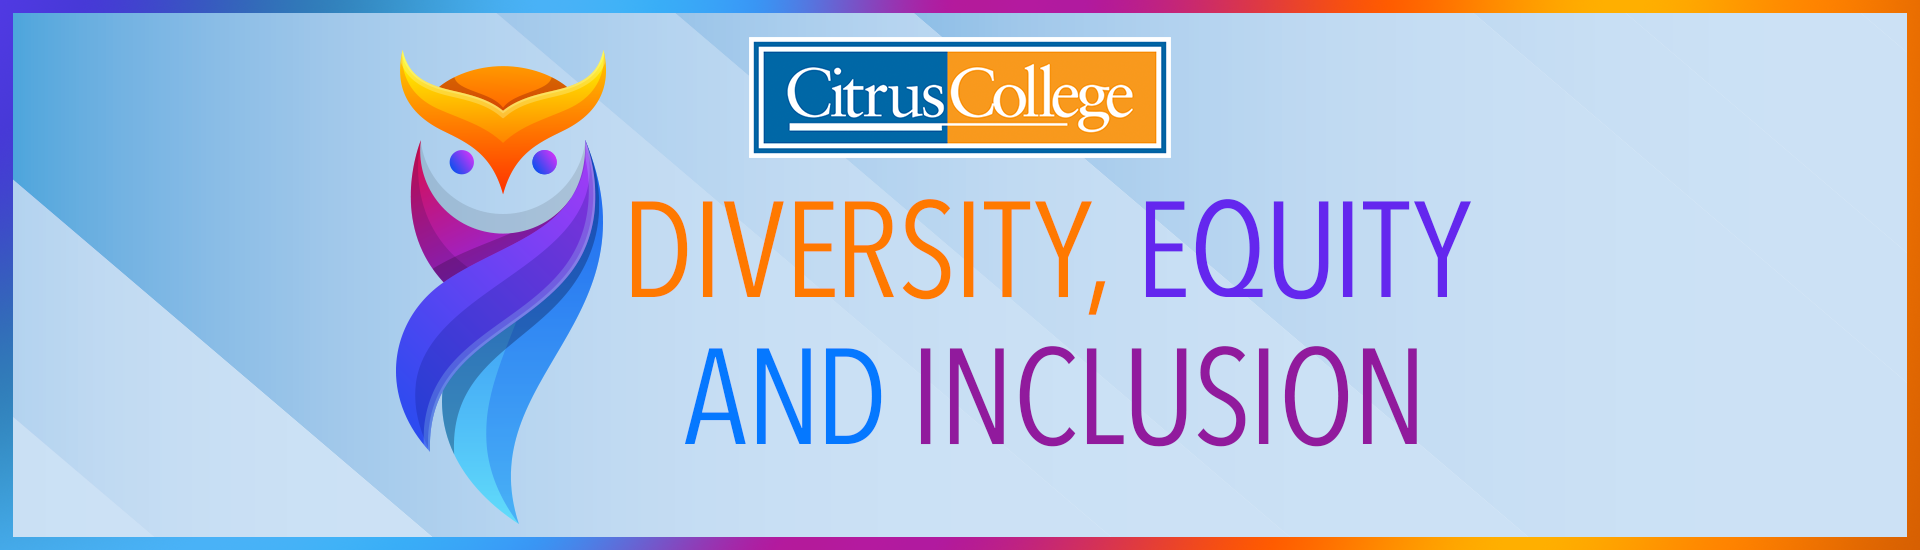 Citrus College Diversity, Equity and Inclusion banner